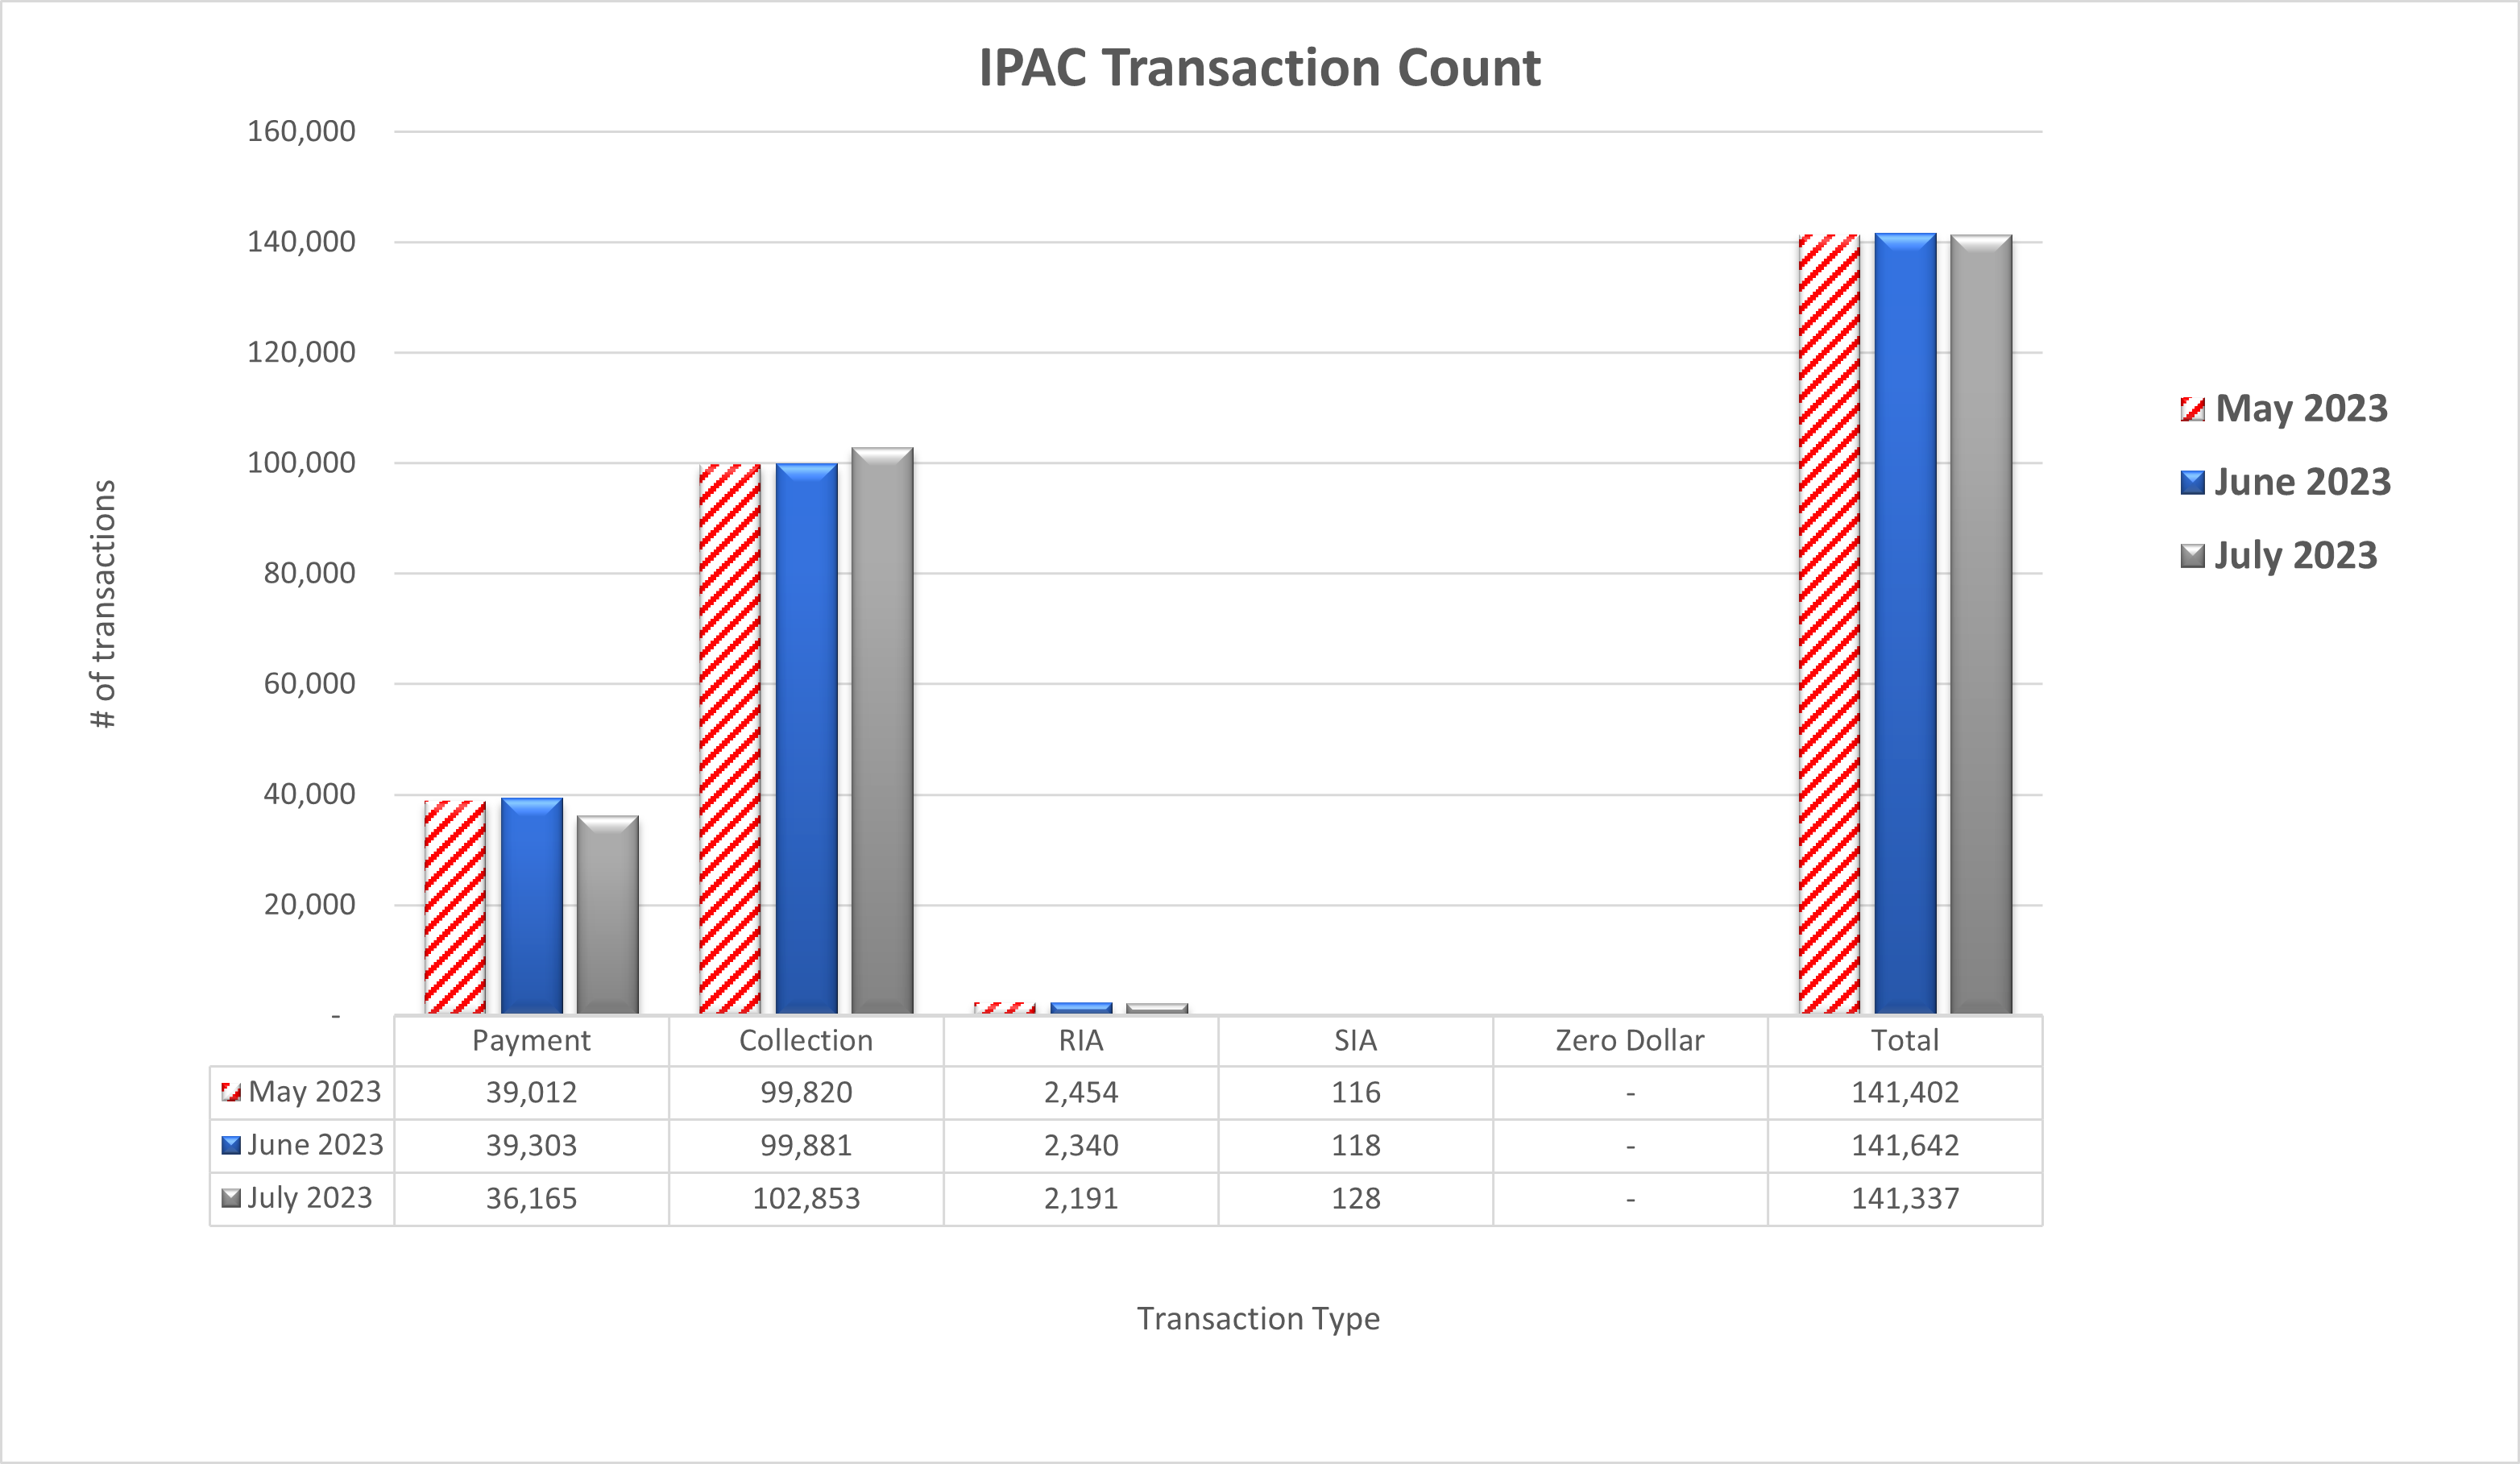 IPAC Transaction Count May 2023 through July 2023